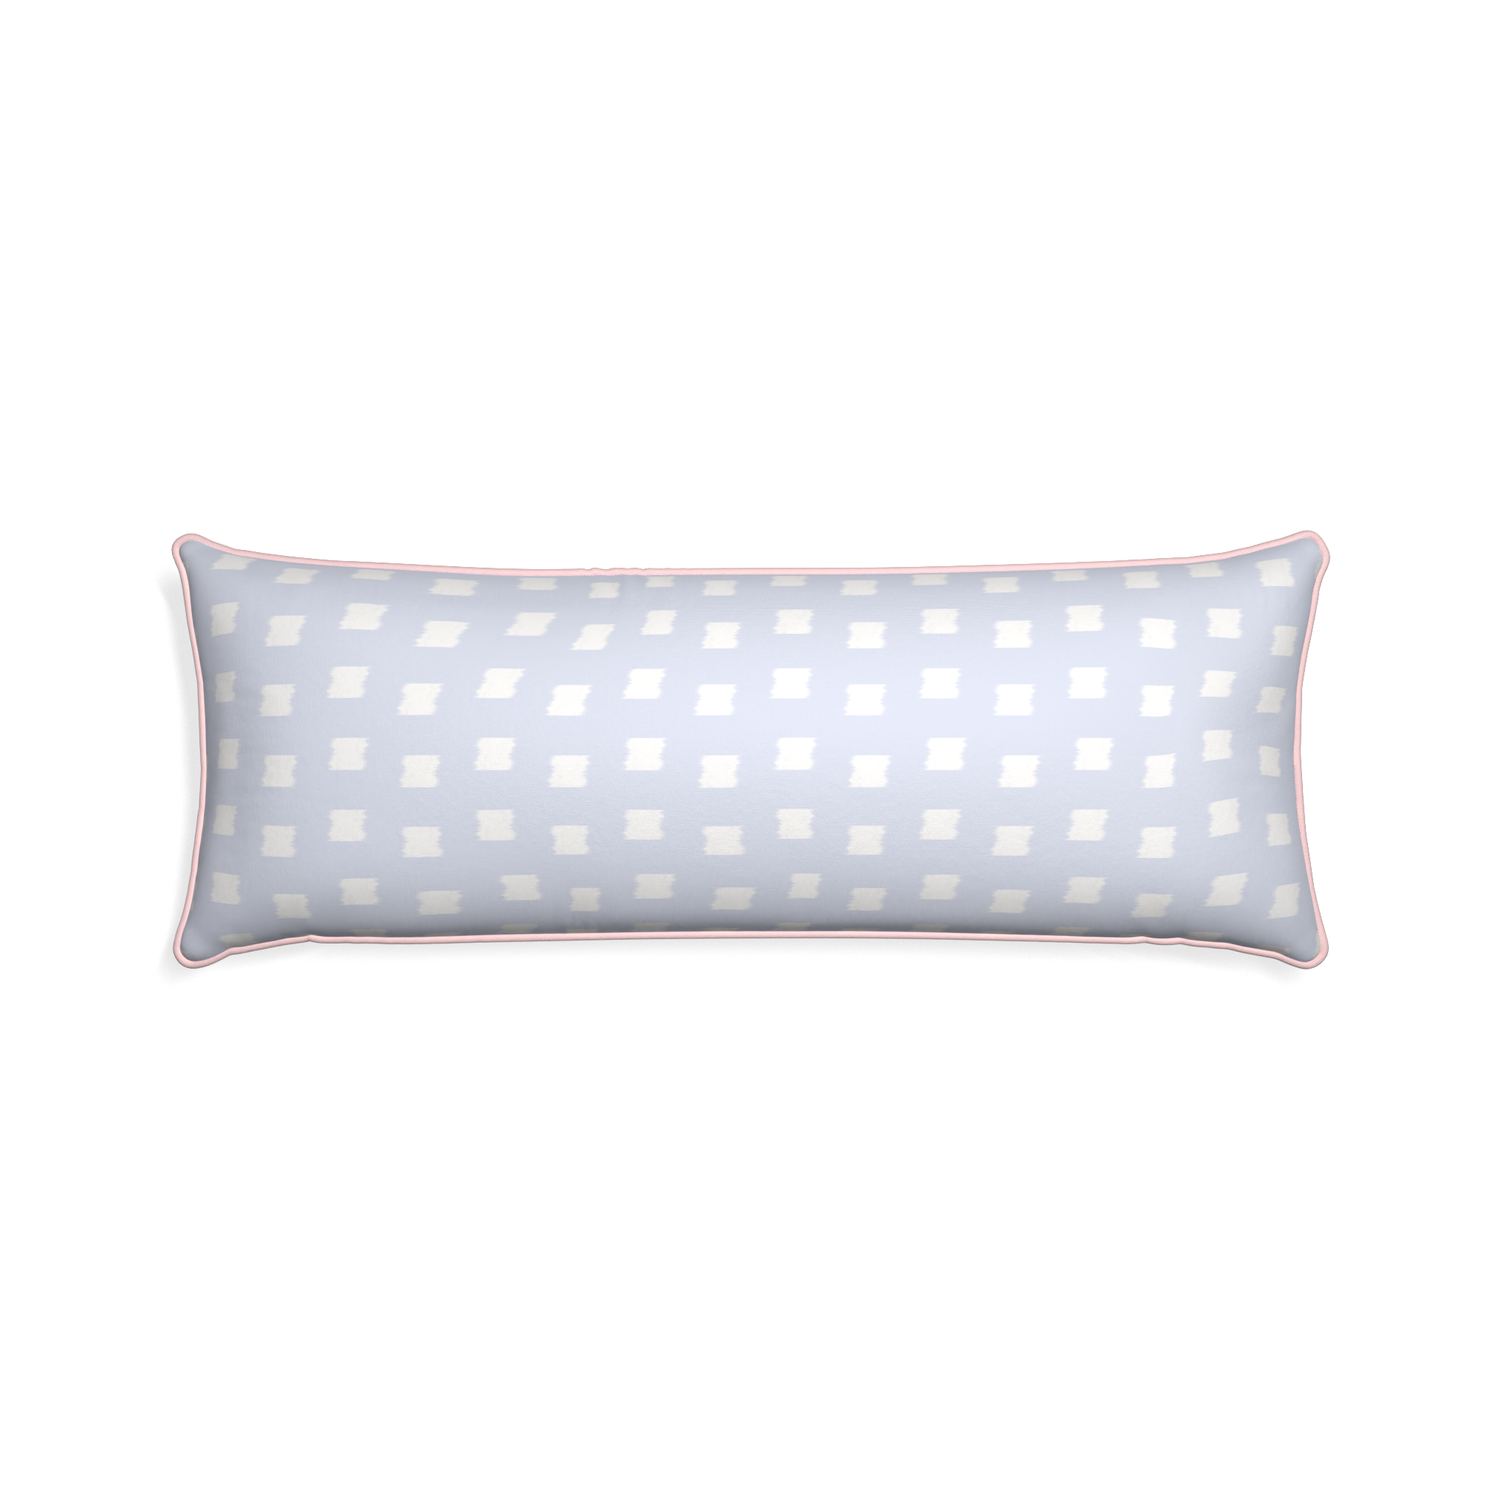 Xl-lumbar denton custom sky blue patternpillow with petal piping on white background